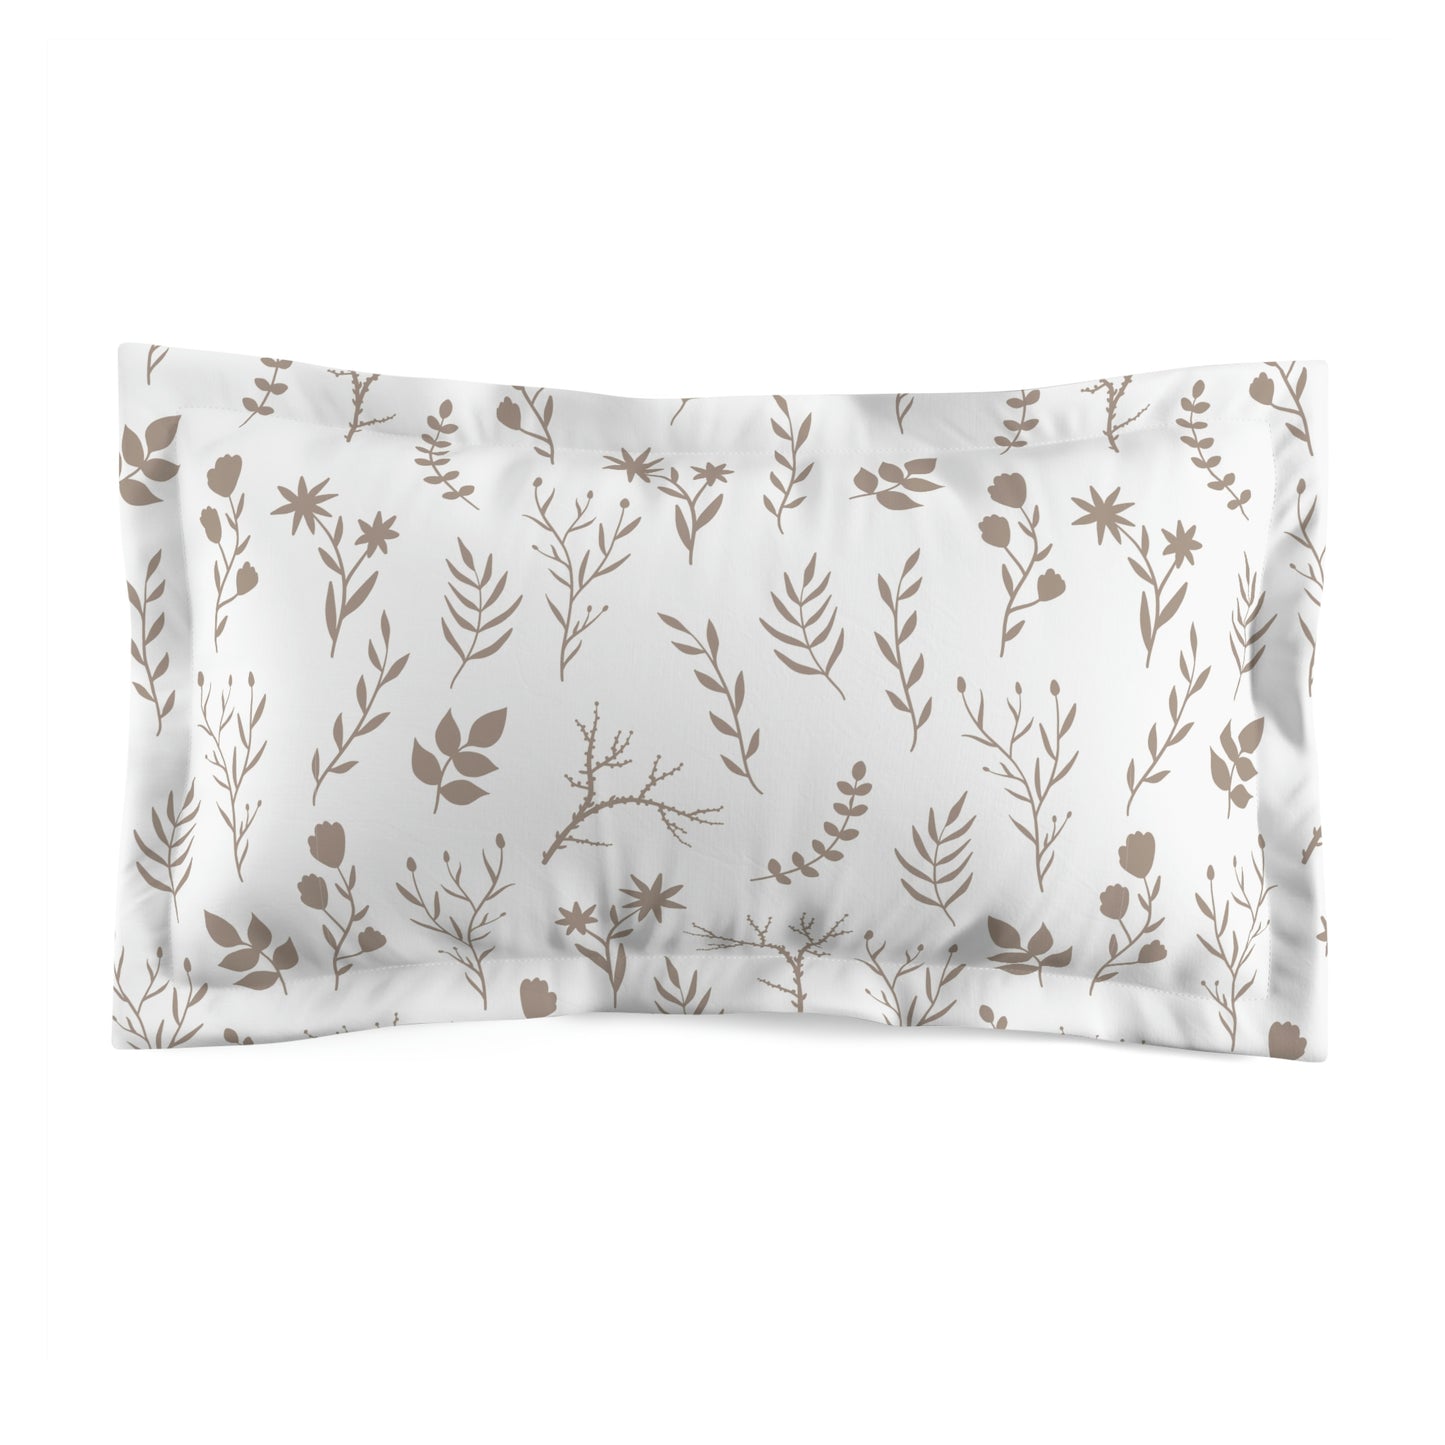 Elegant Taupe and White Floral Microfiber Pillow Sham